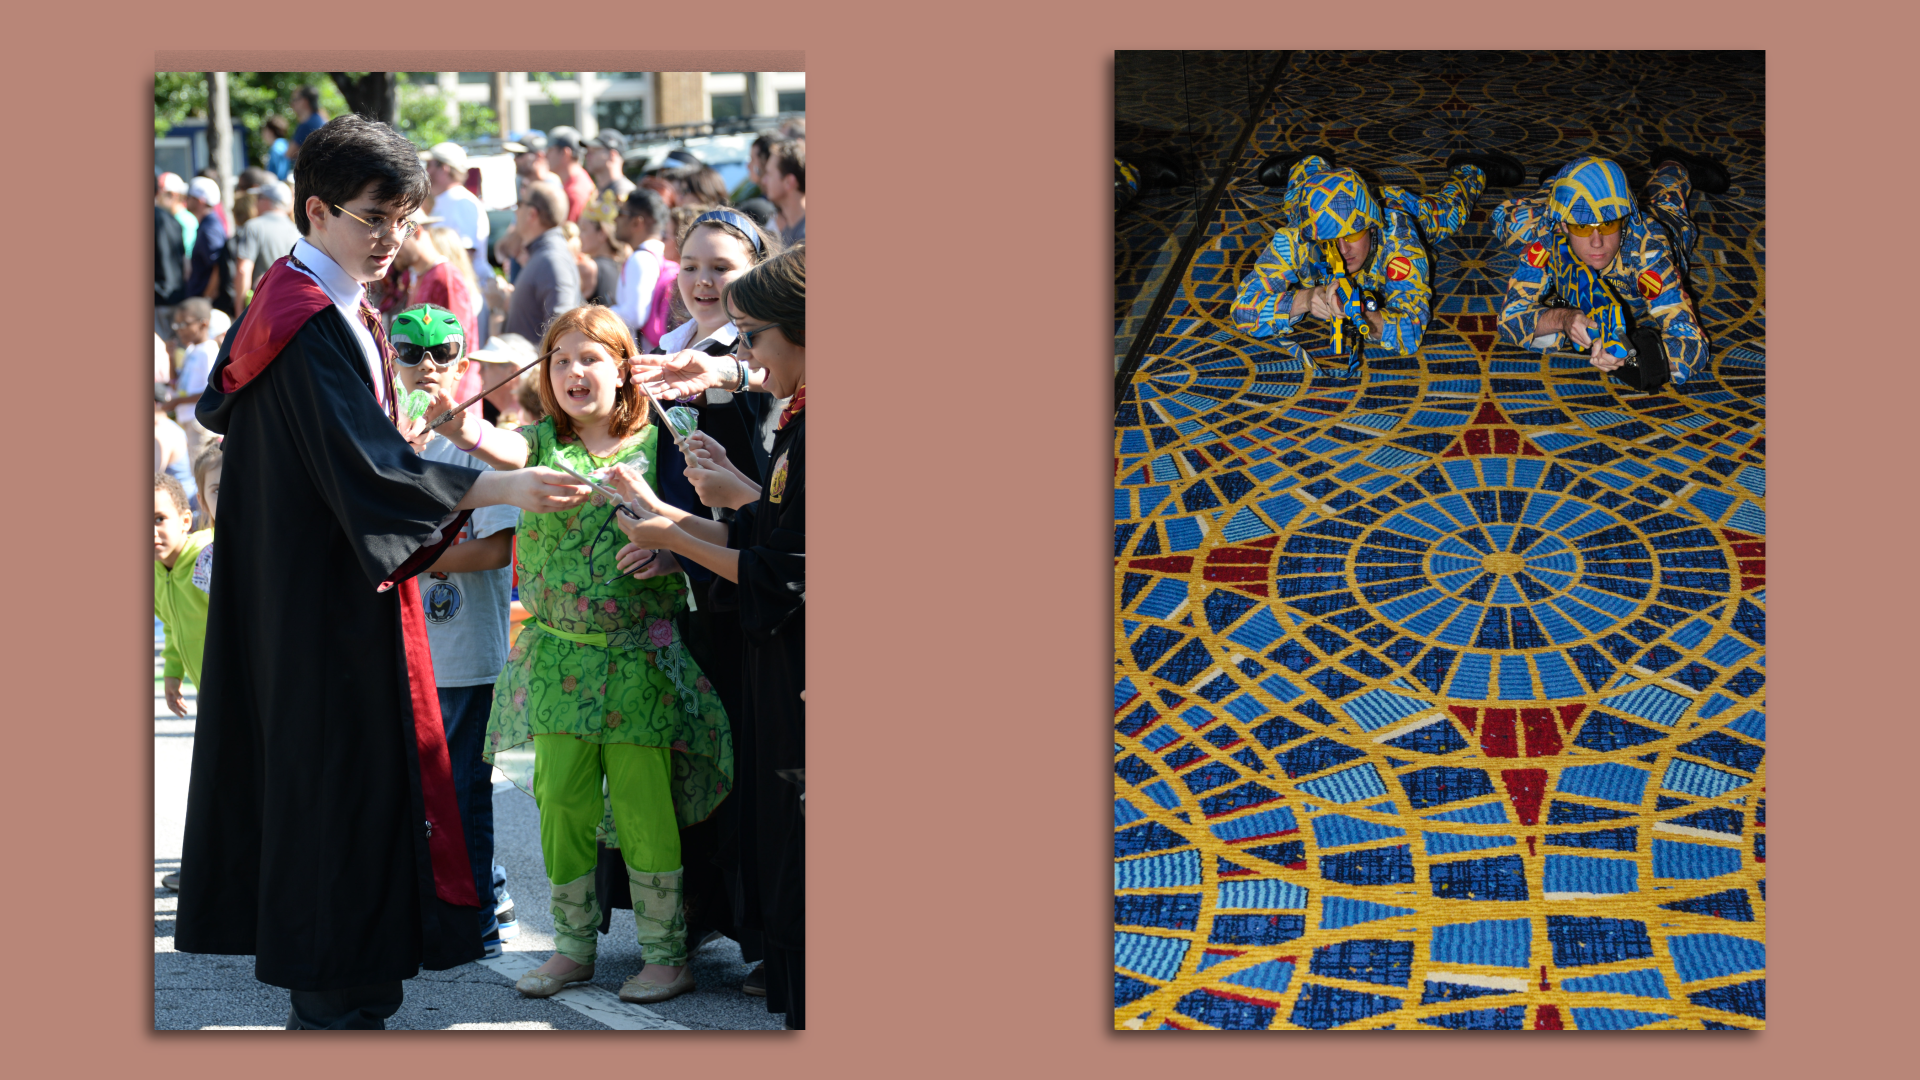 Side by side photos of a young person dressed as Harry Potter shaking hands with young people during a parade and two people dressed as troopers in camouflage  that matches the intricate carpet